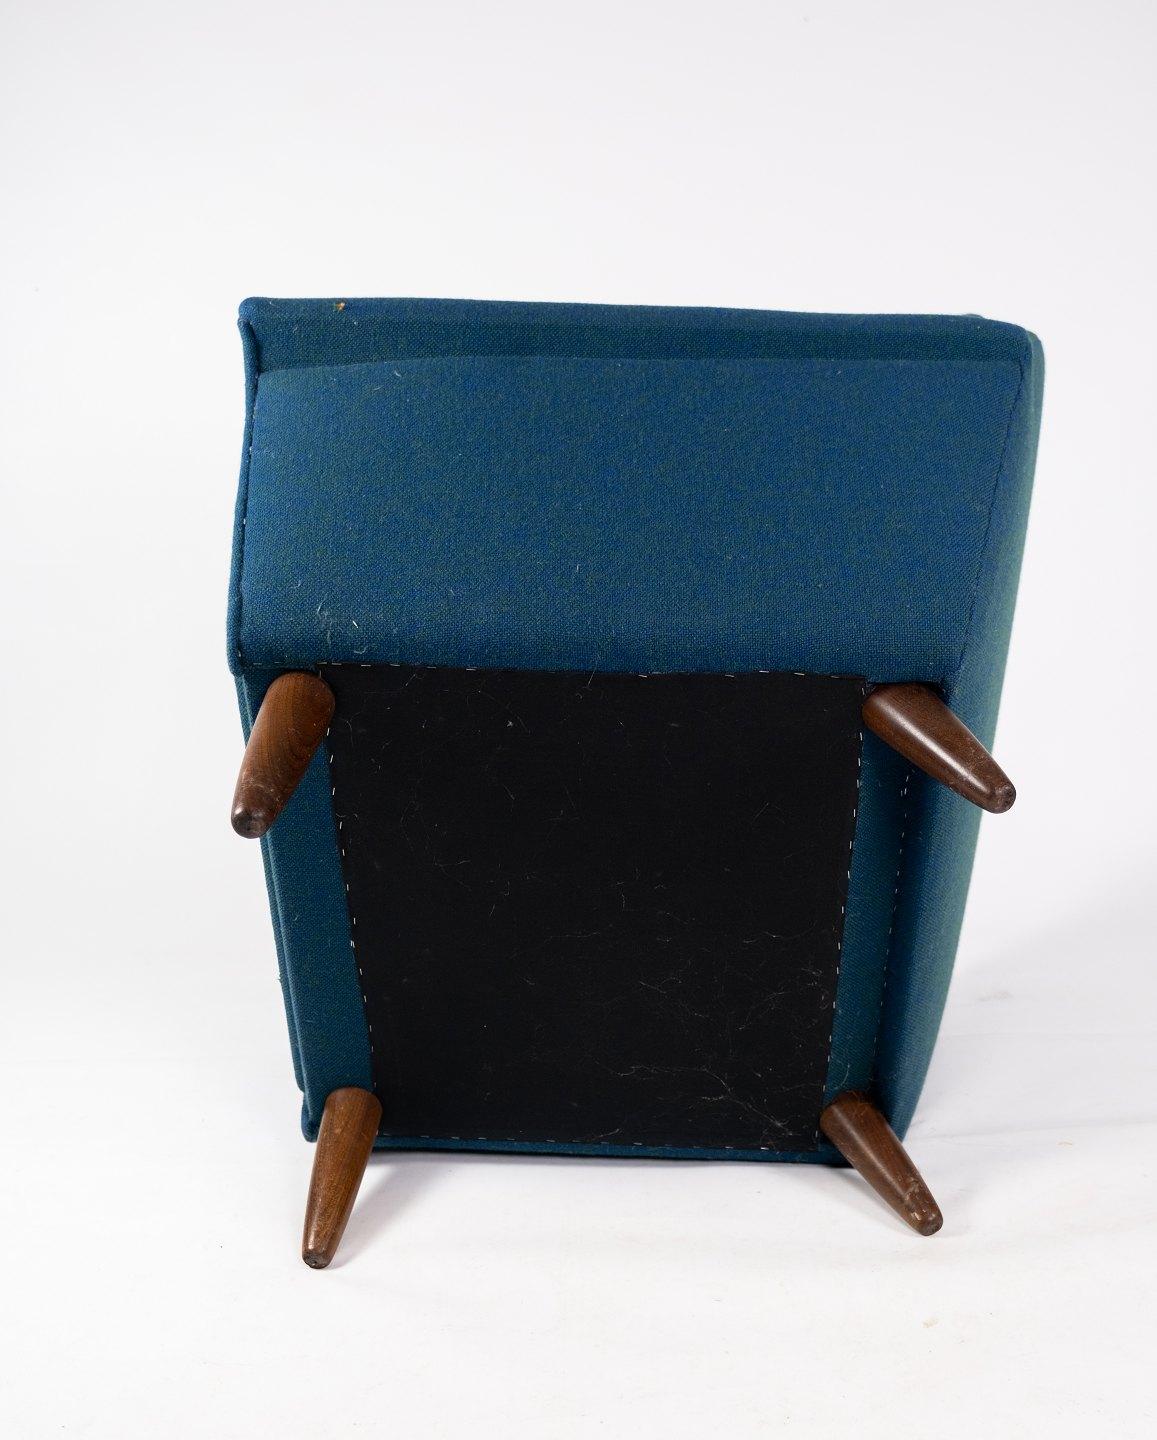 Armchair Upholstered with Dark Blue Wool Fabric and Legs in Dark Wood, 1960s For Sale 2